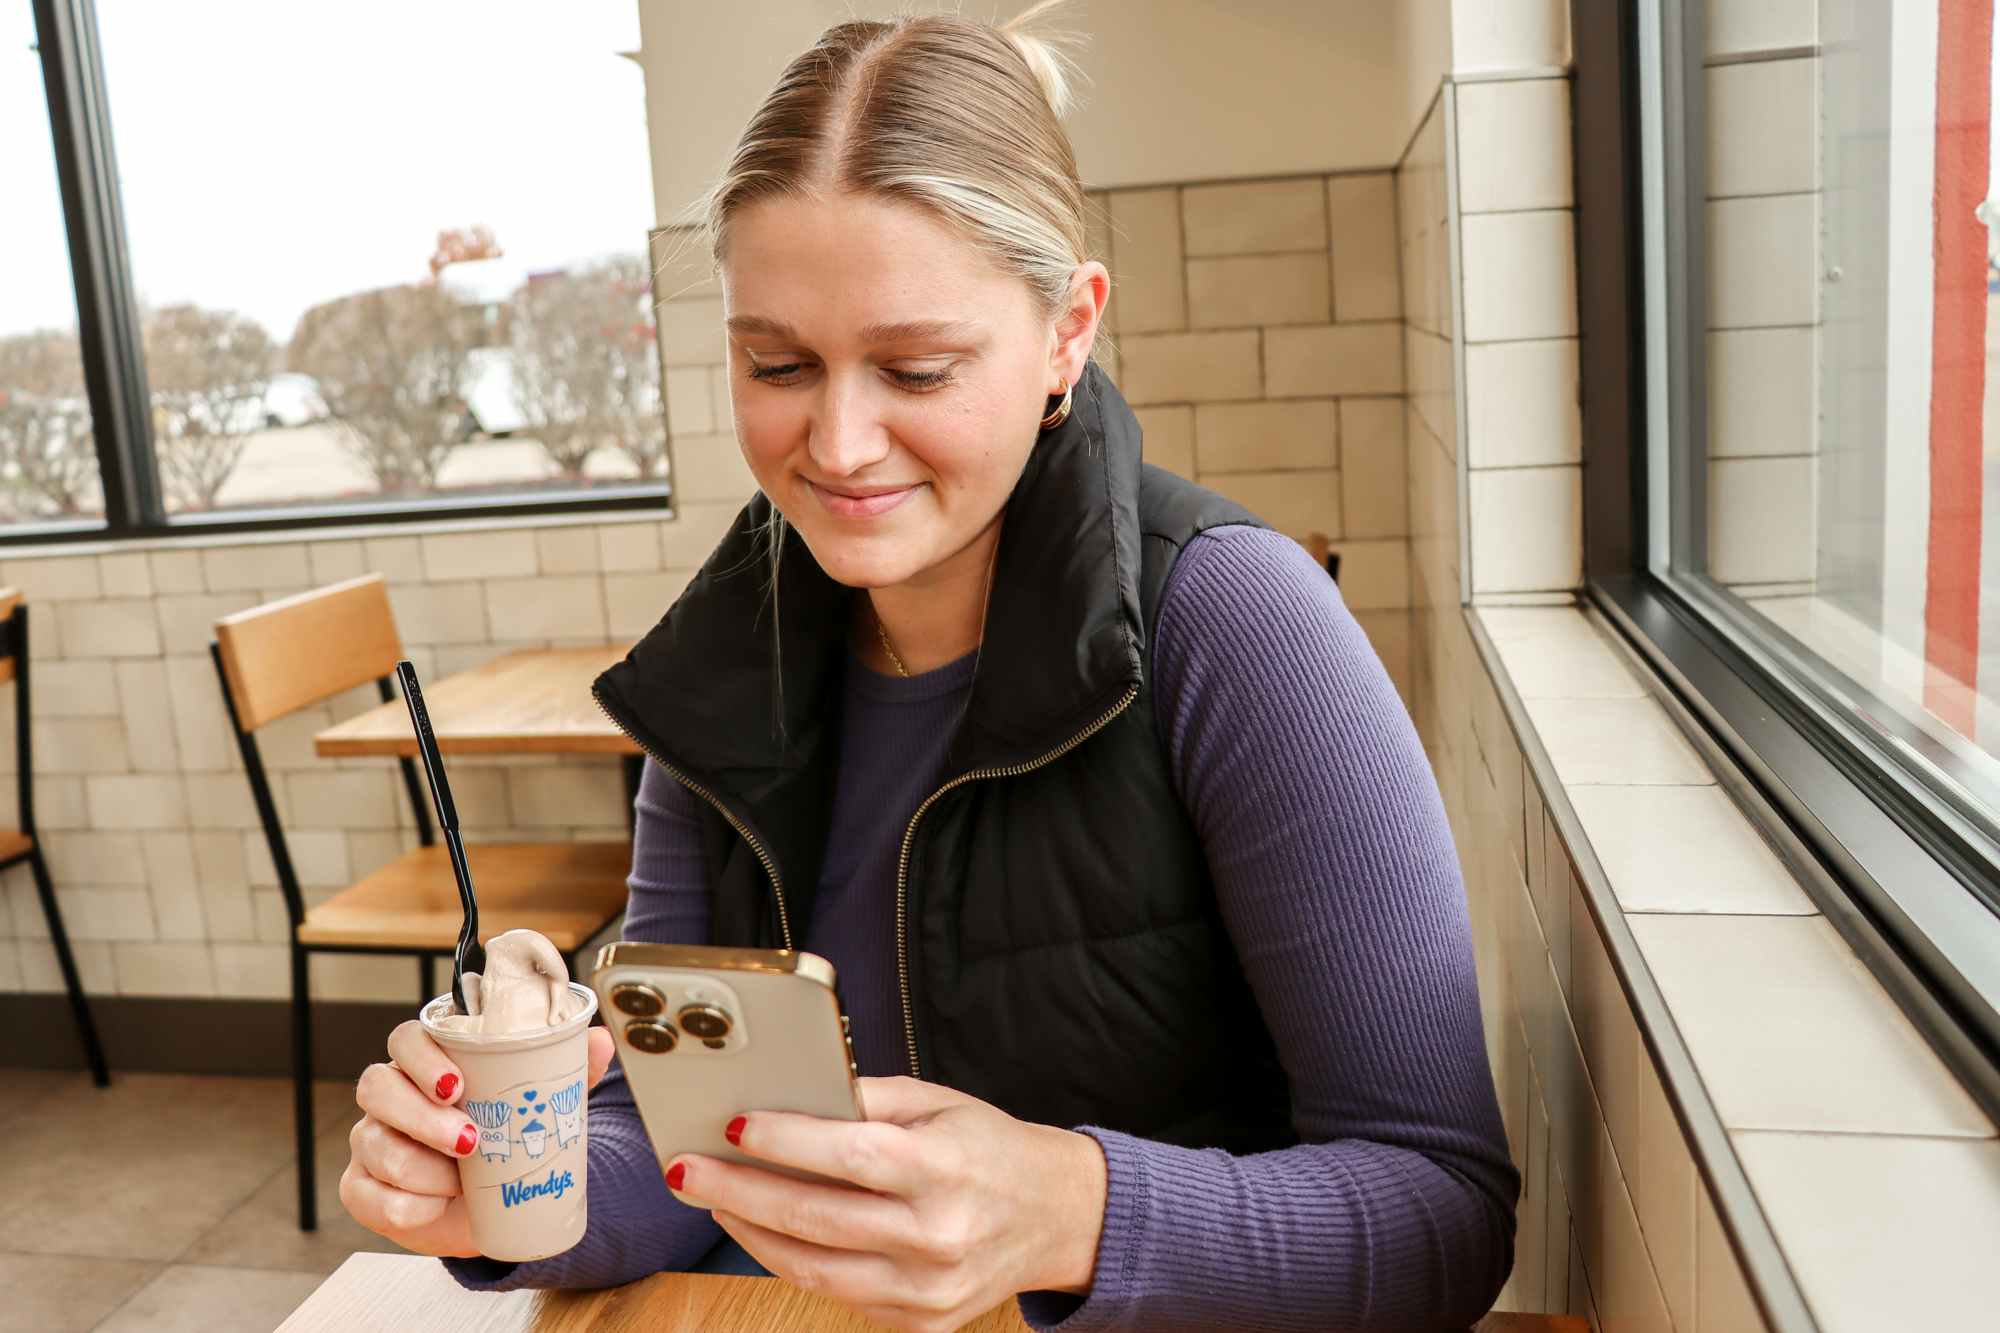  person looking at their phone inside of wendys while holding a frosty